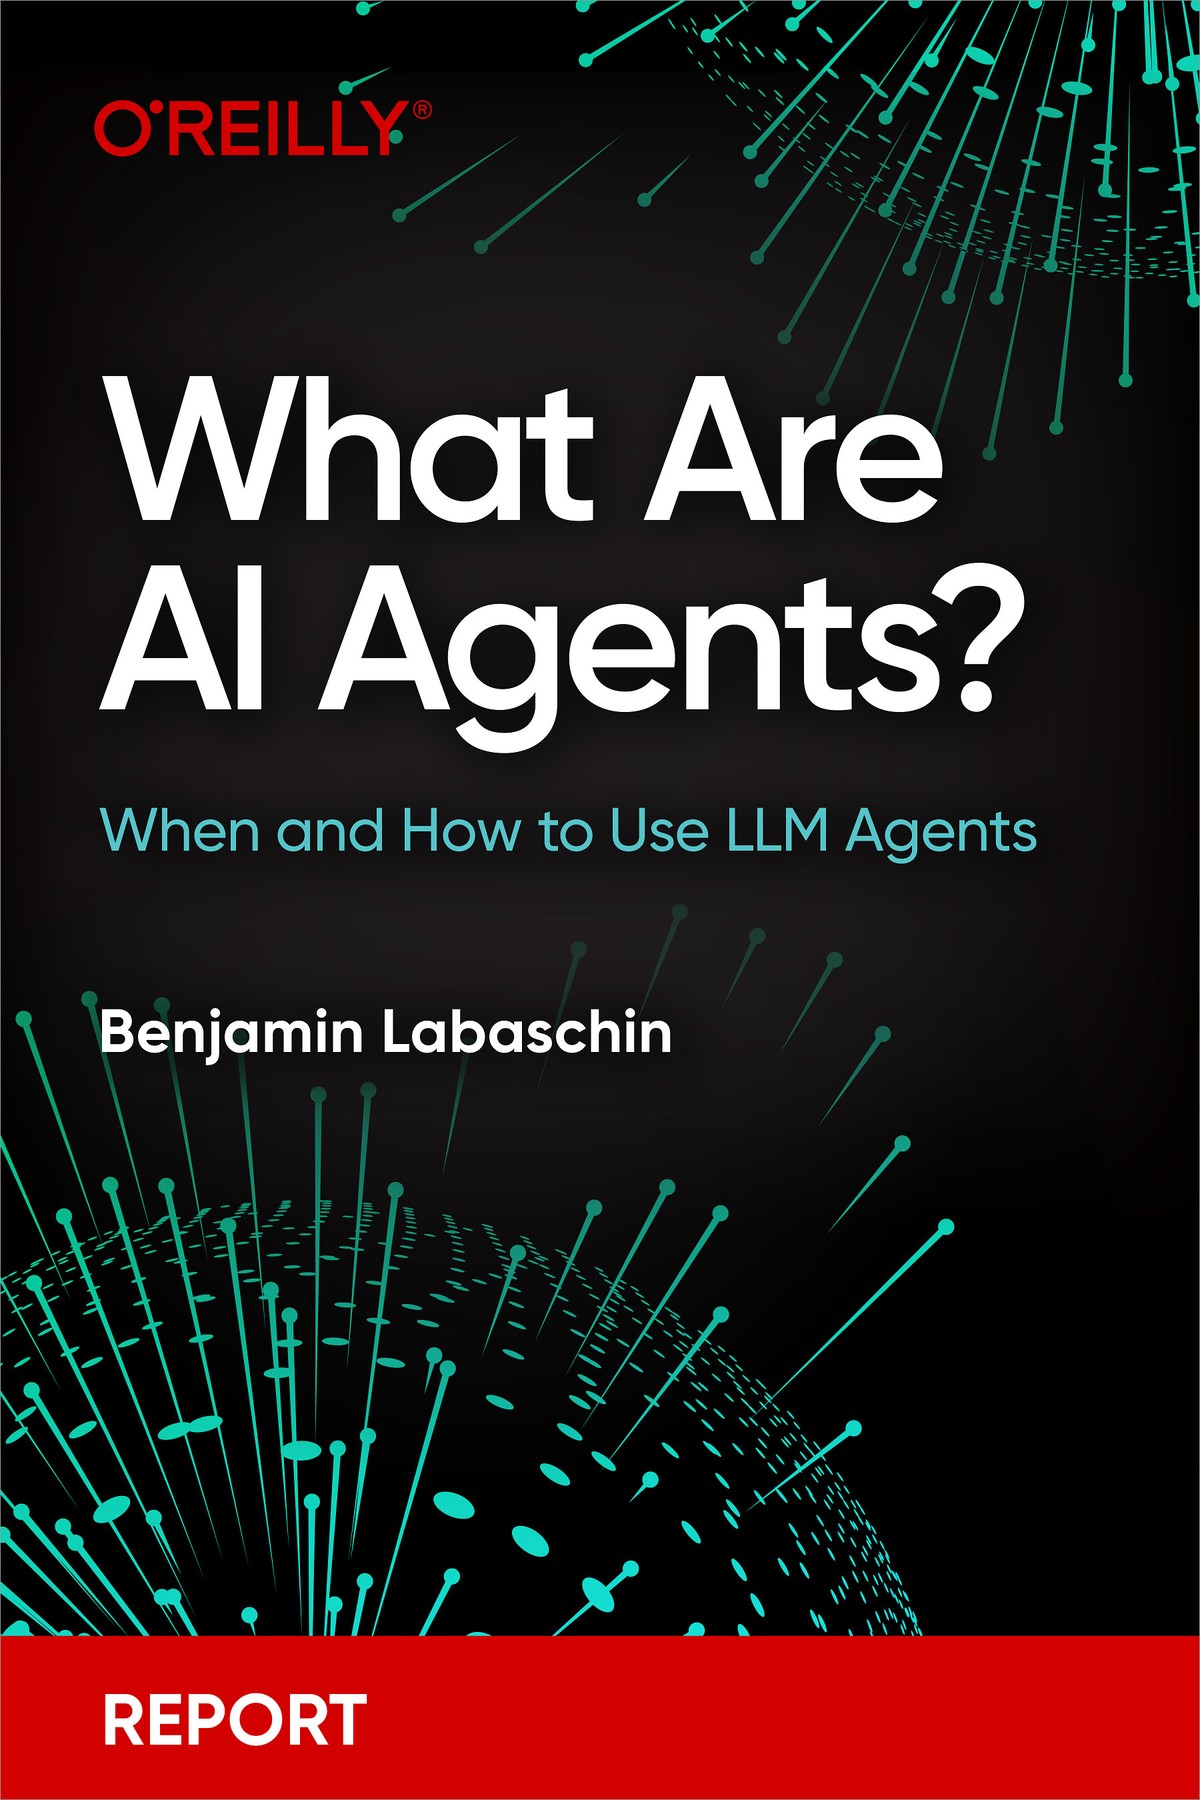 What Are AI Agents?